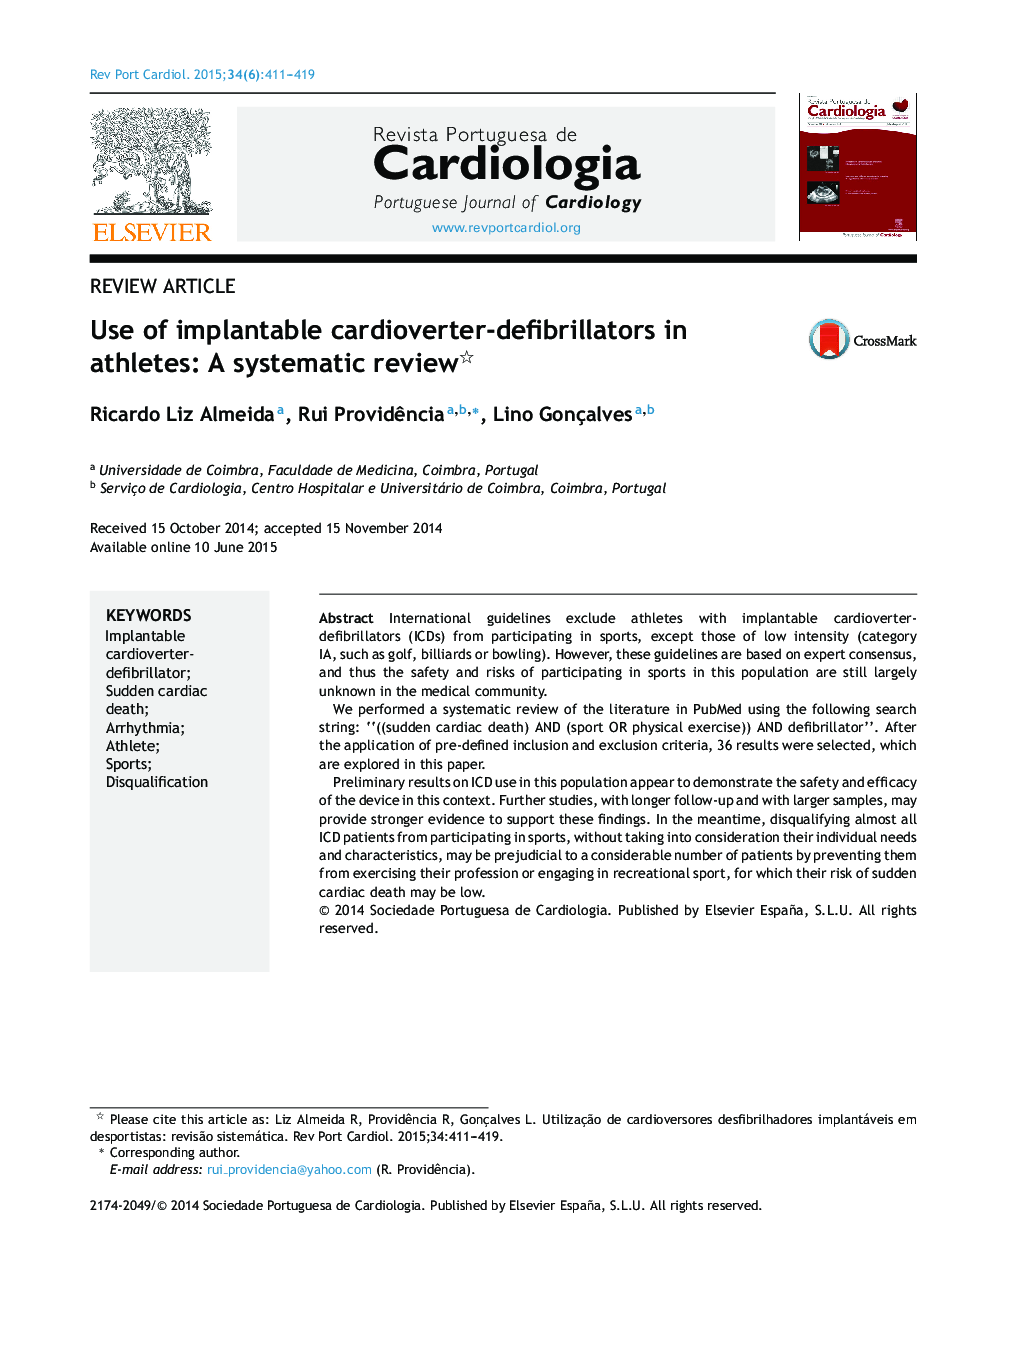 Use of implantable cardioverter-defibrillators in athletes: A systematic review